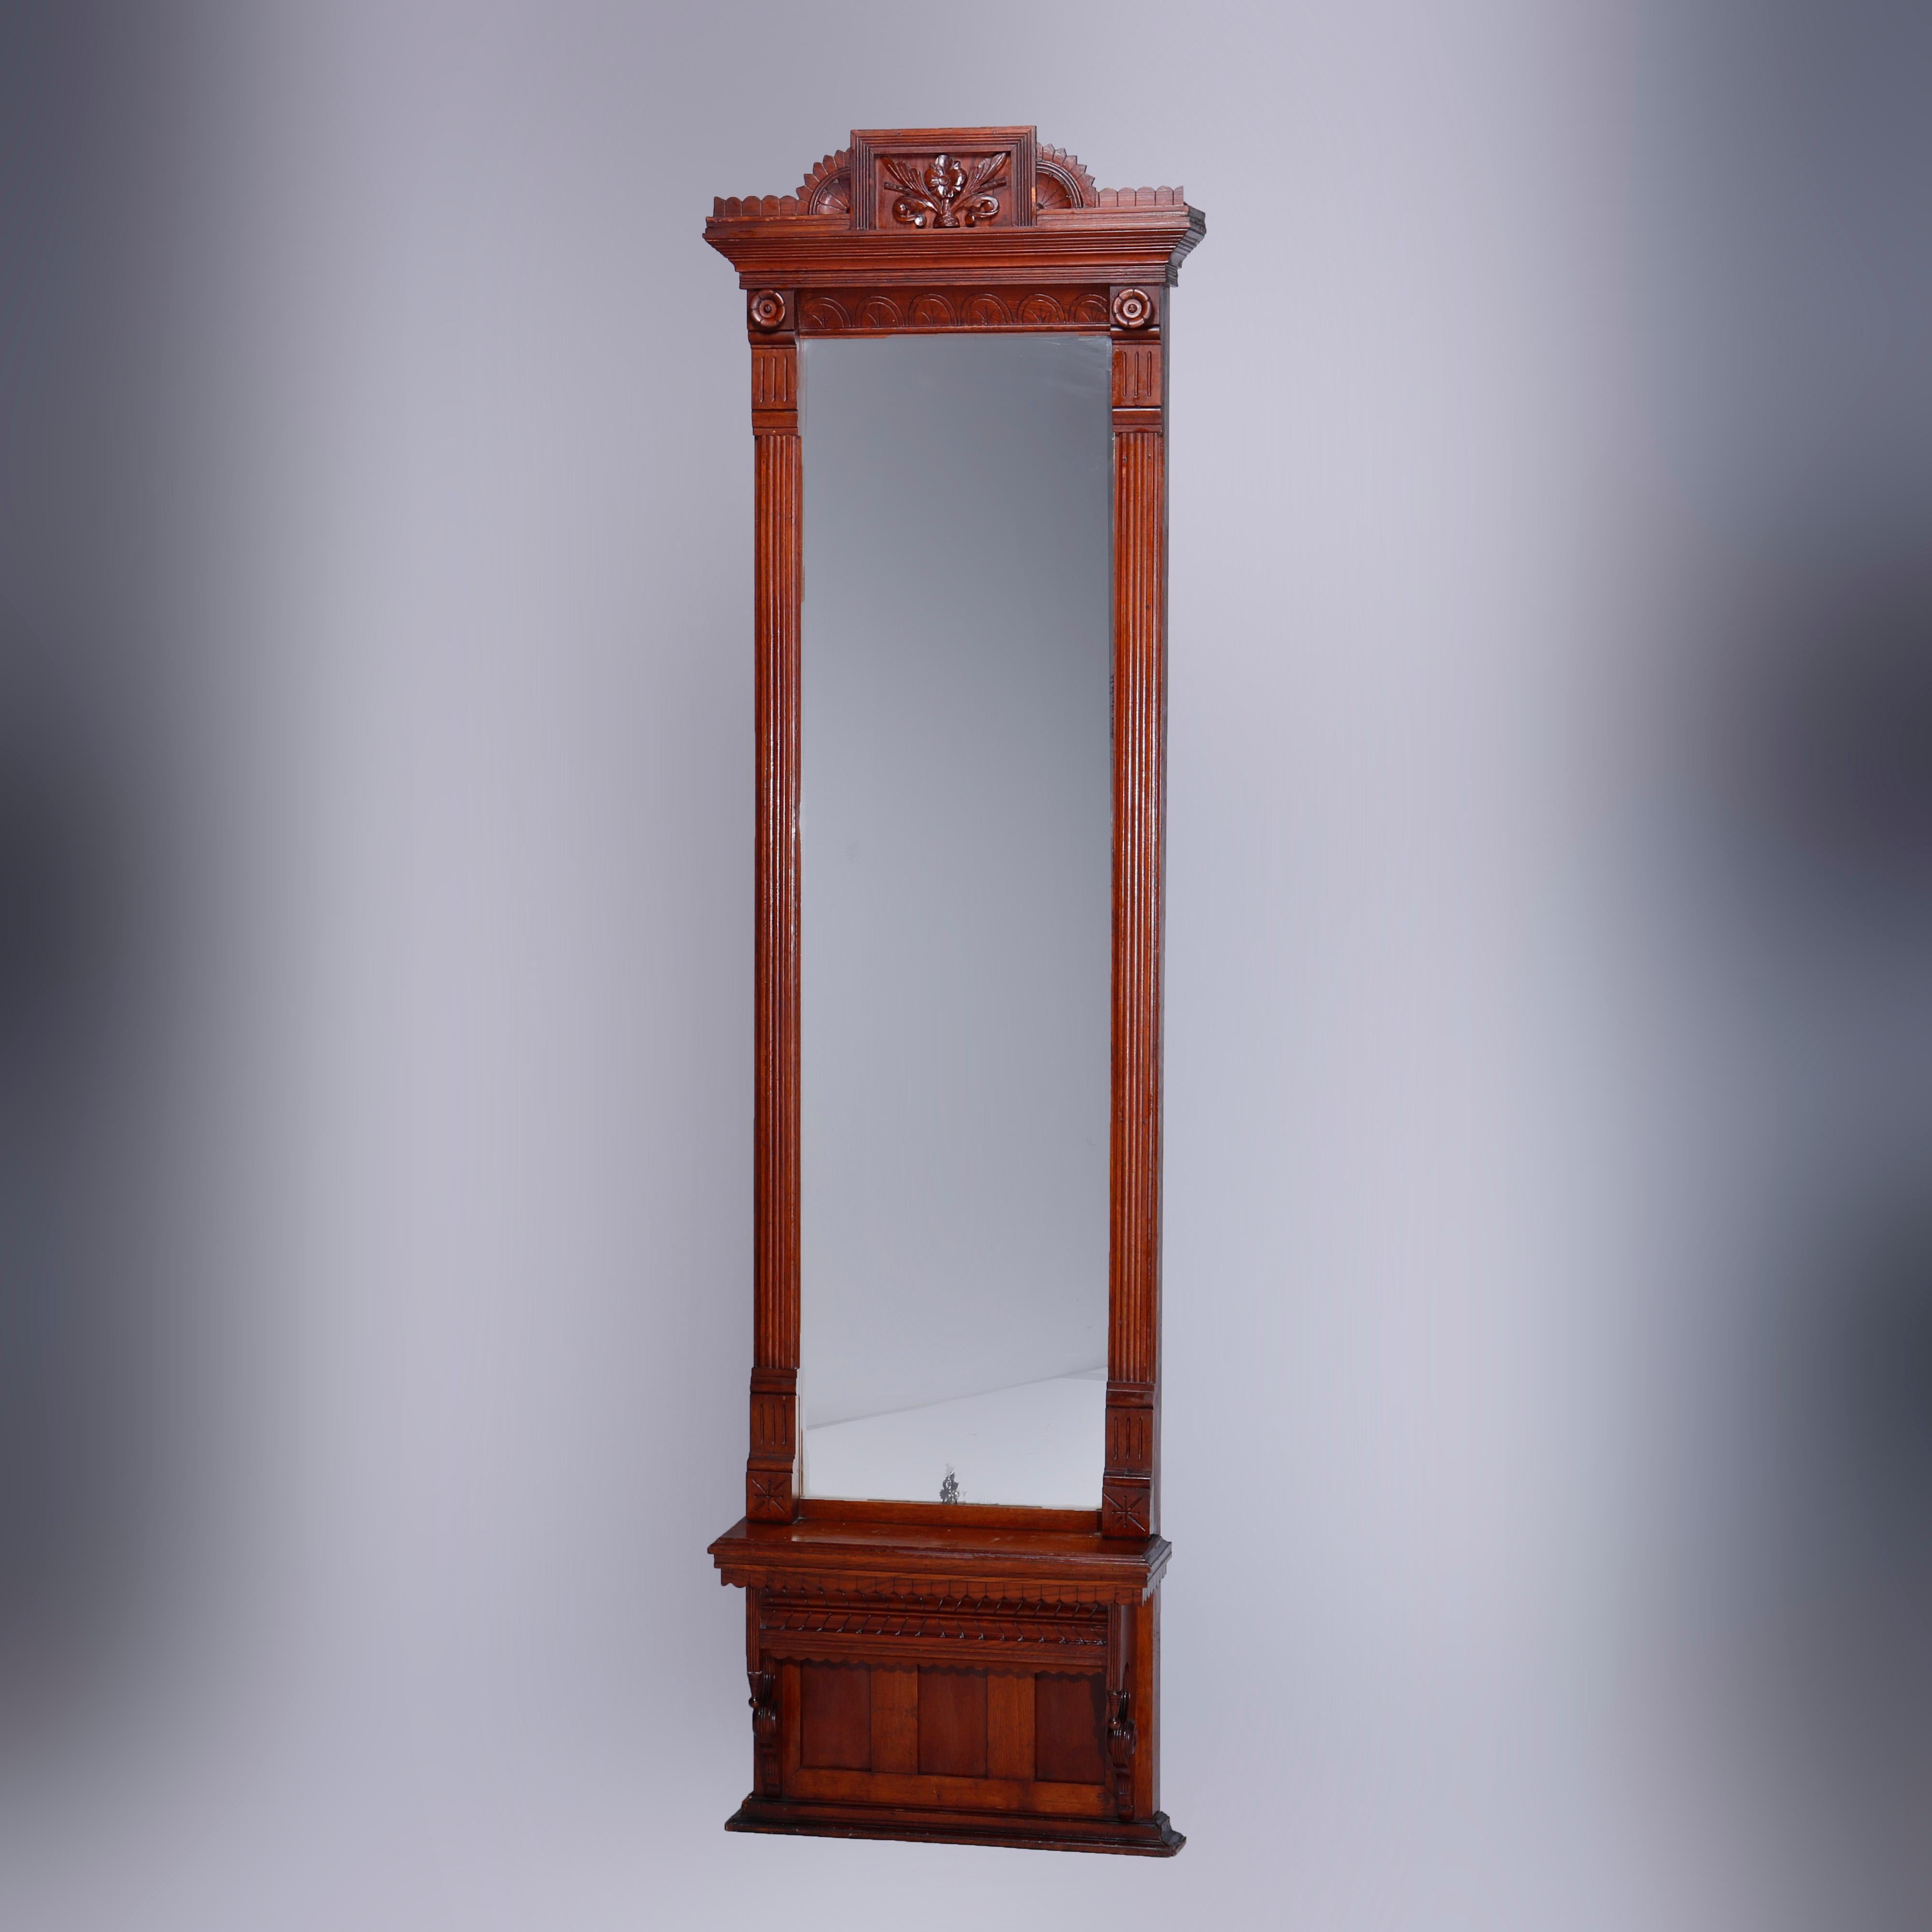 An antique Aesthetic Eastlake pier mirror offers oak construction with carve foliate crest having flanking stylized sunburst elements reeded frame housing mirror surmounting paneled base with shaped skirt and drop finials, incised decoration